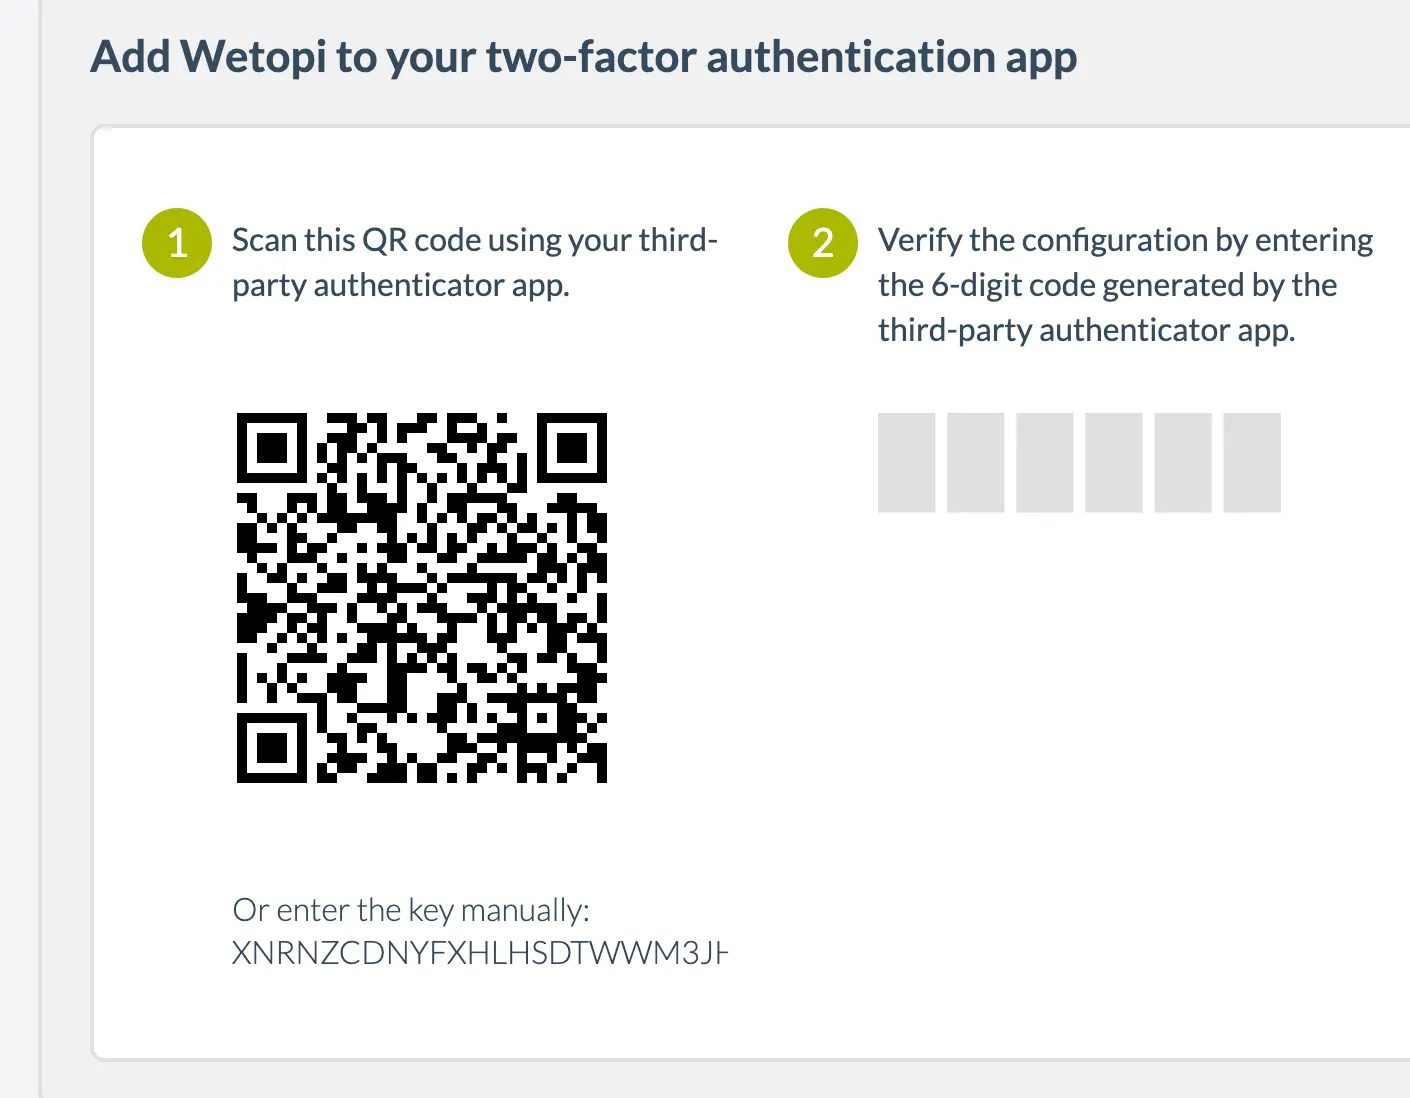 Add Wetopi to your two-factor authentication app